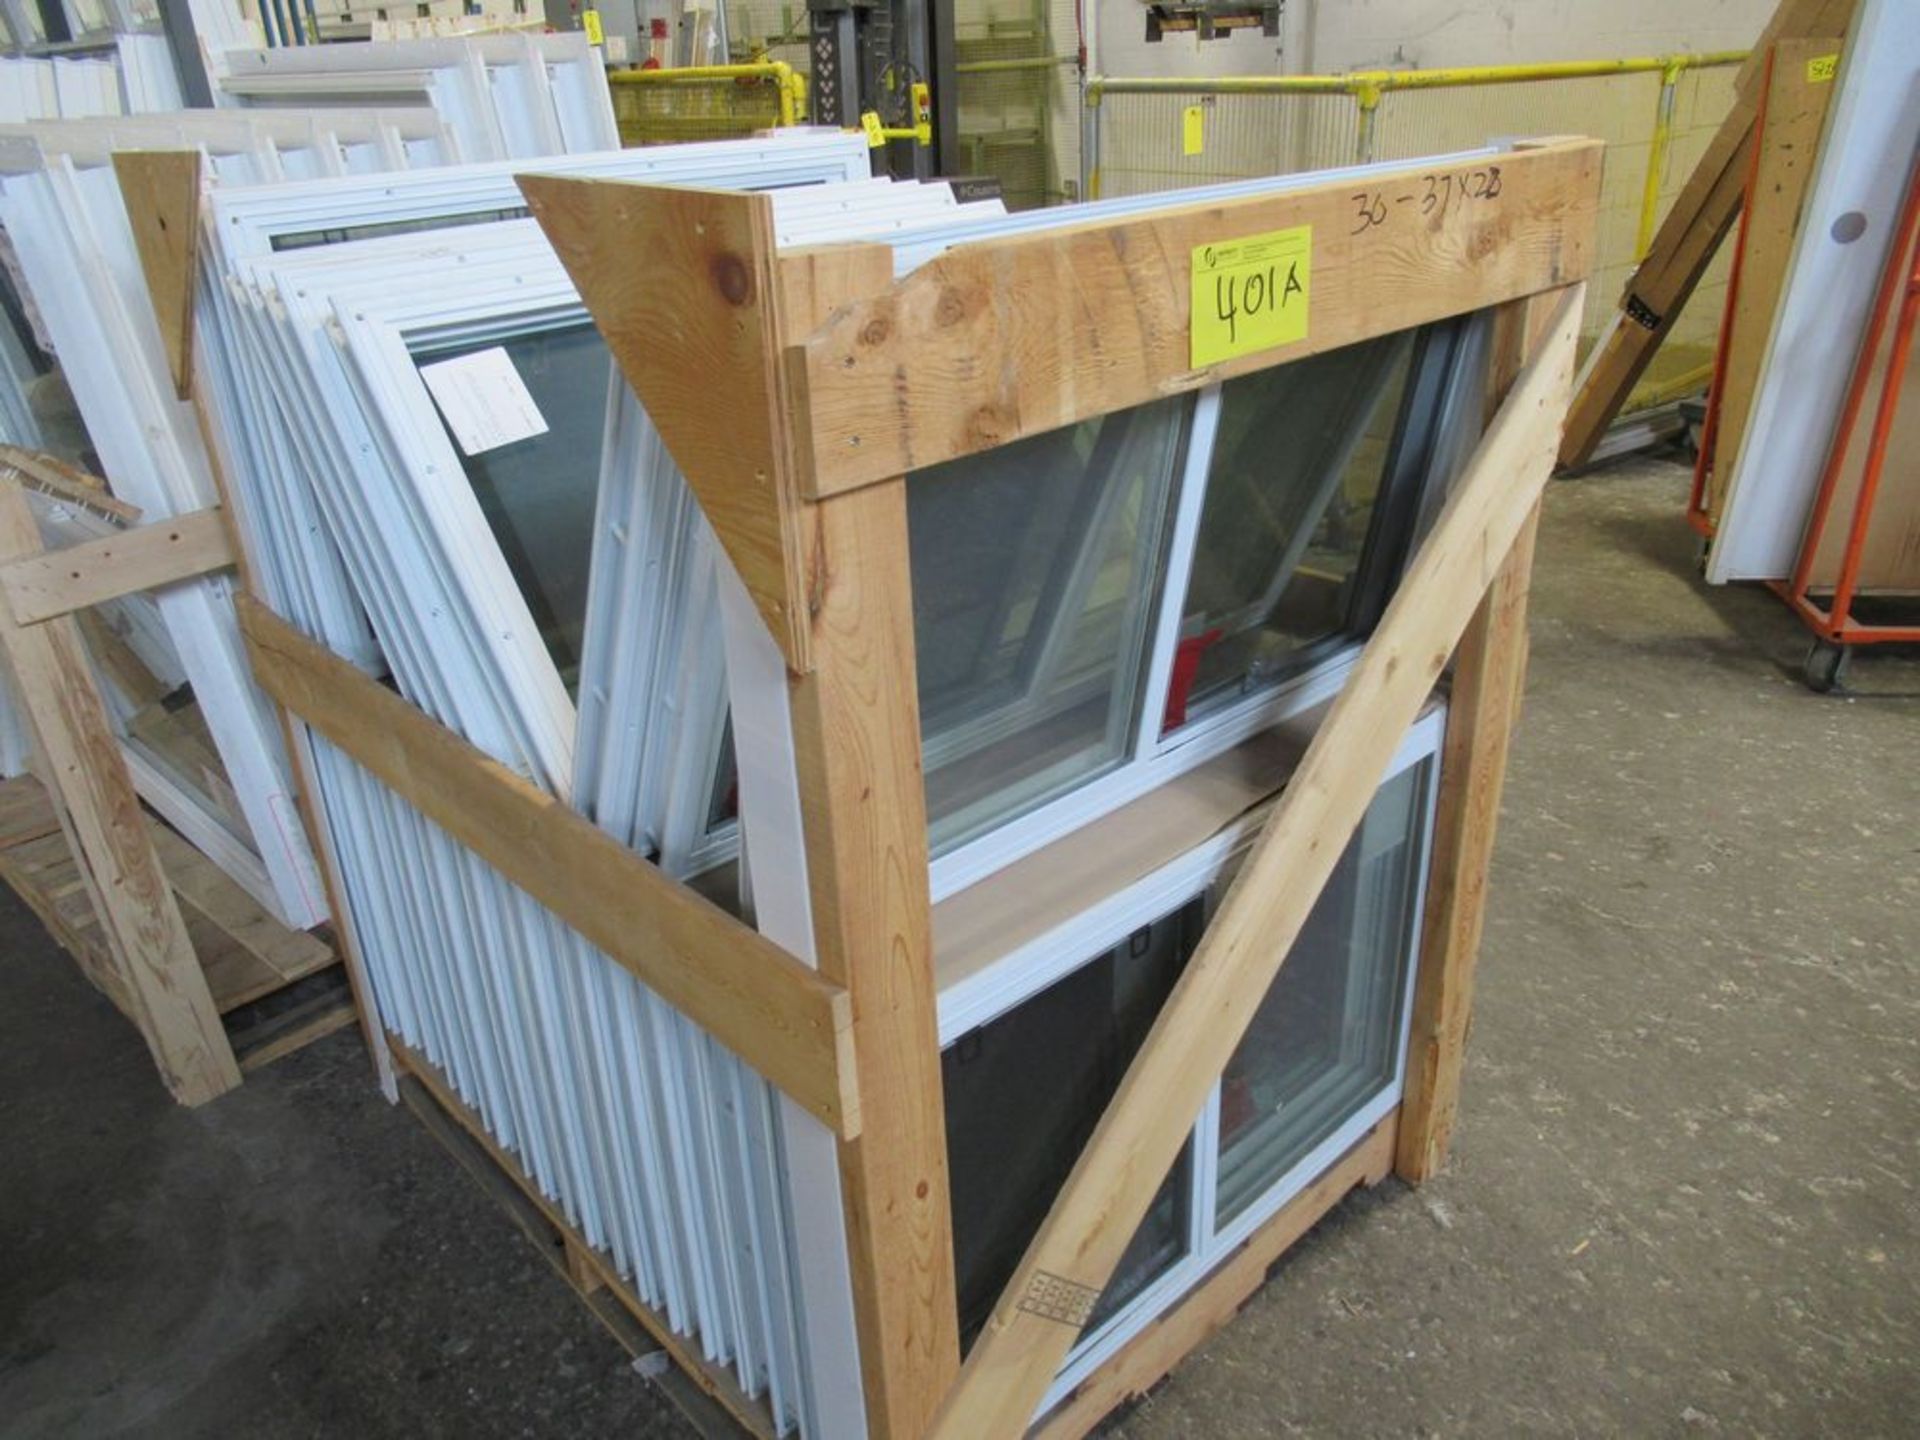 41 PC. ASST. 30-37" X 22" APPROX. 11-65" X 21" APPROX. WHITE DOOR INSERTS, 2 CRATES - Image 2 of 3